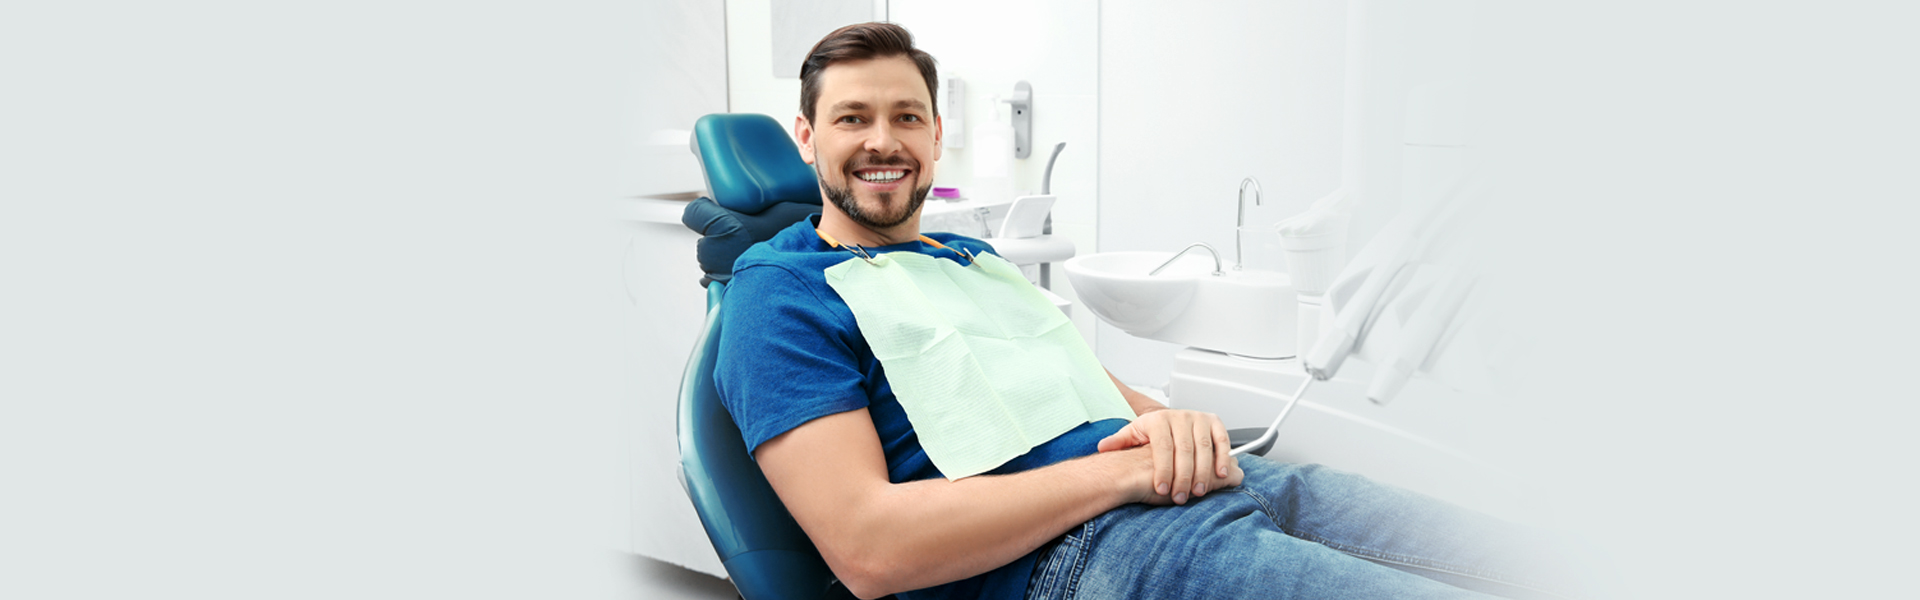 What Happens When You Neglect Six Monthly Visits to Your Dentist?